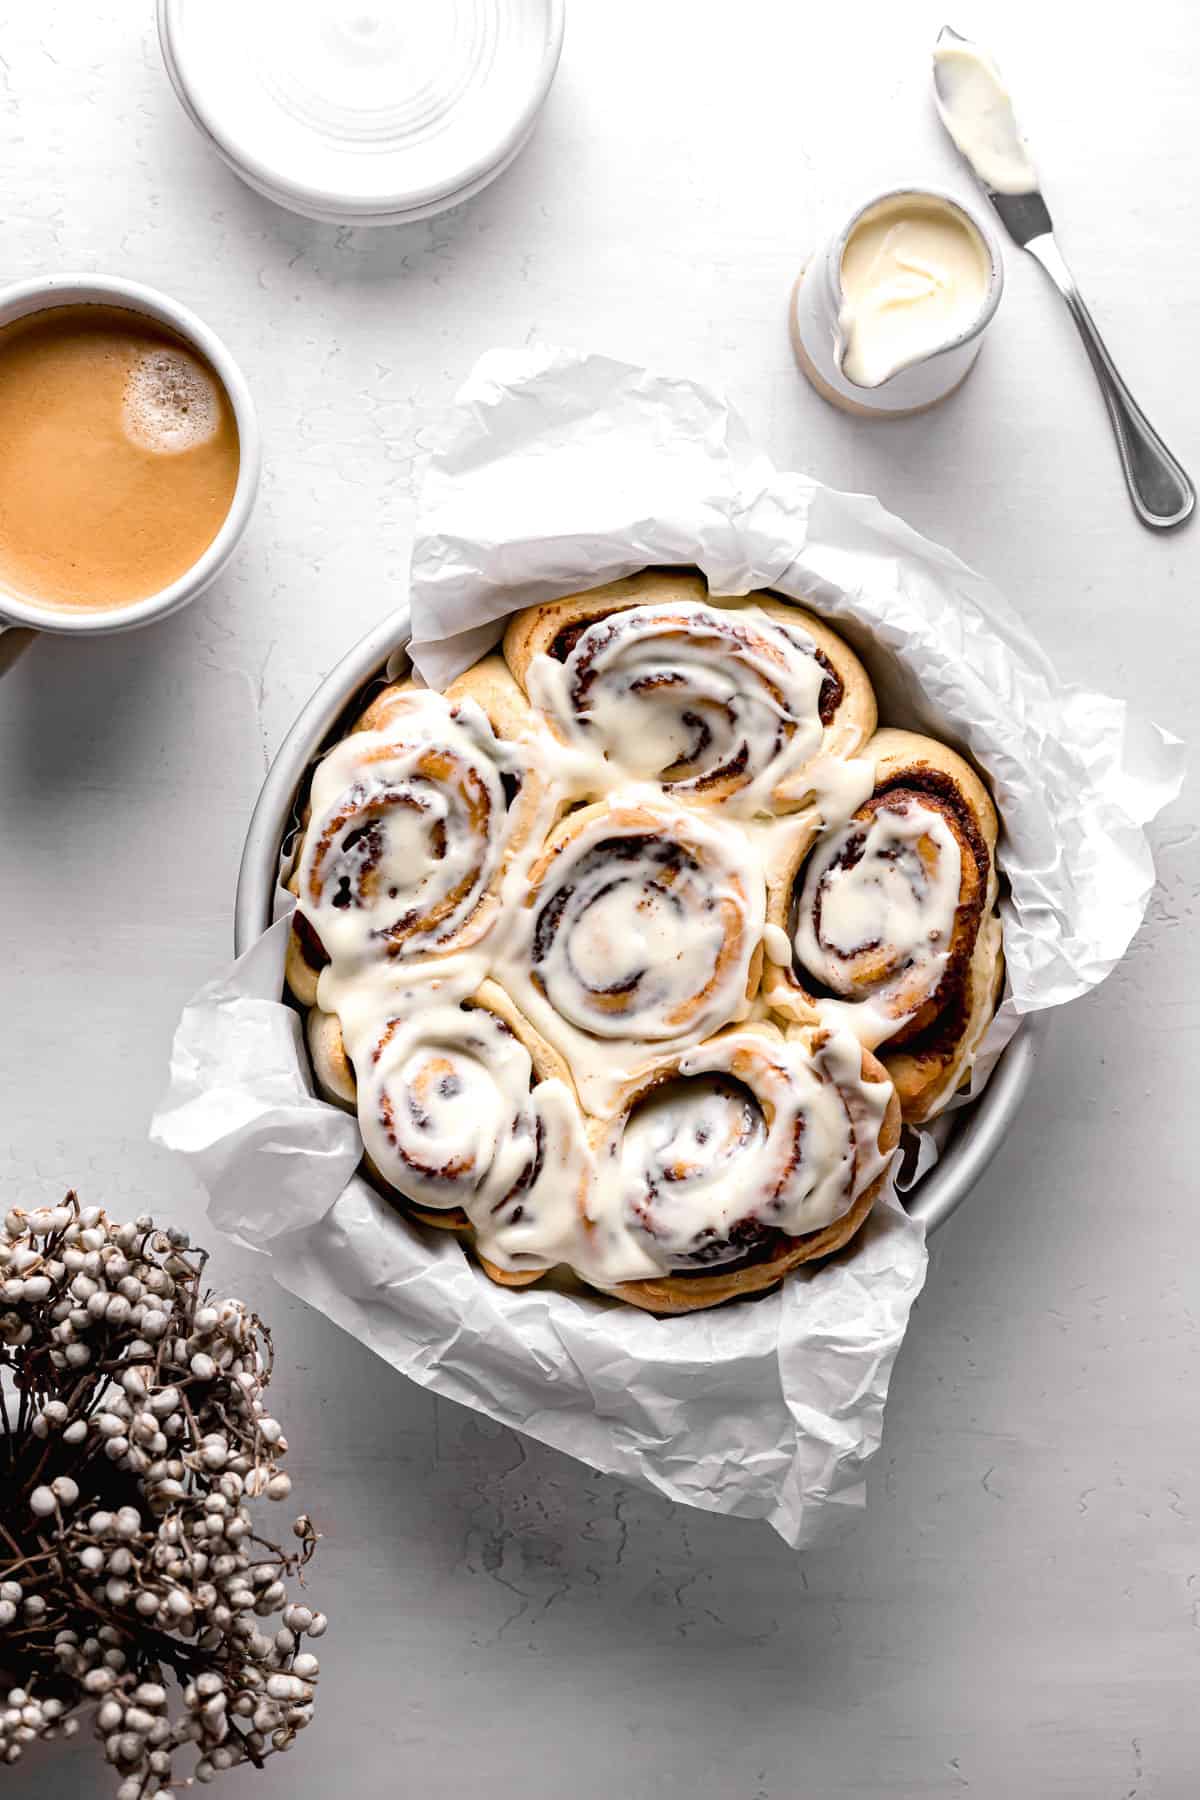 brown butter cardamom cinnamon rolls with cream cheese icing in cake pan.